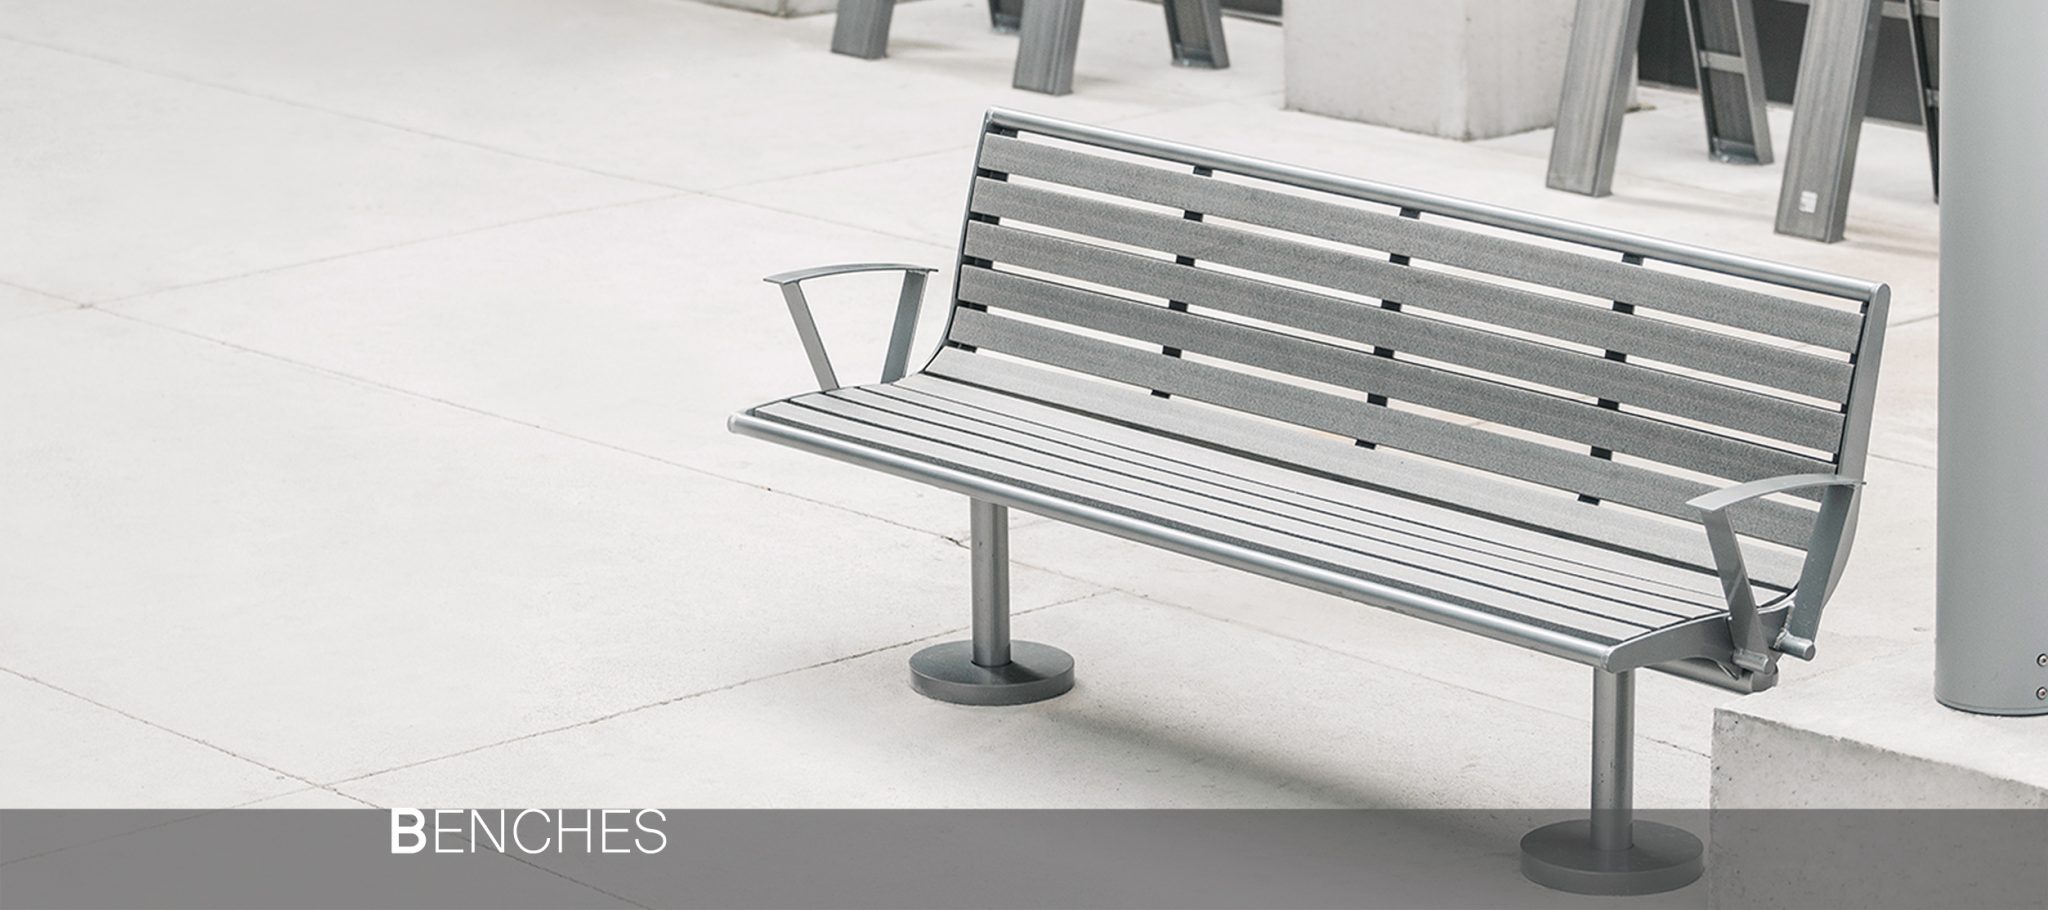 smoothly arced commercial recycled plastic bench that is compatible in a variety of outdoor environments.